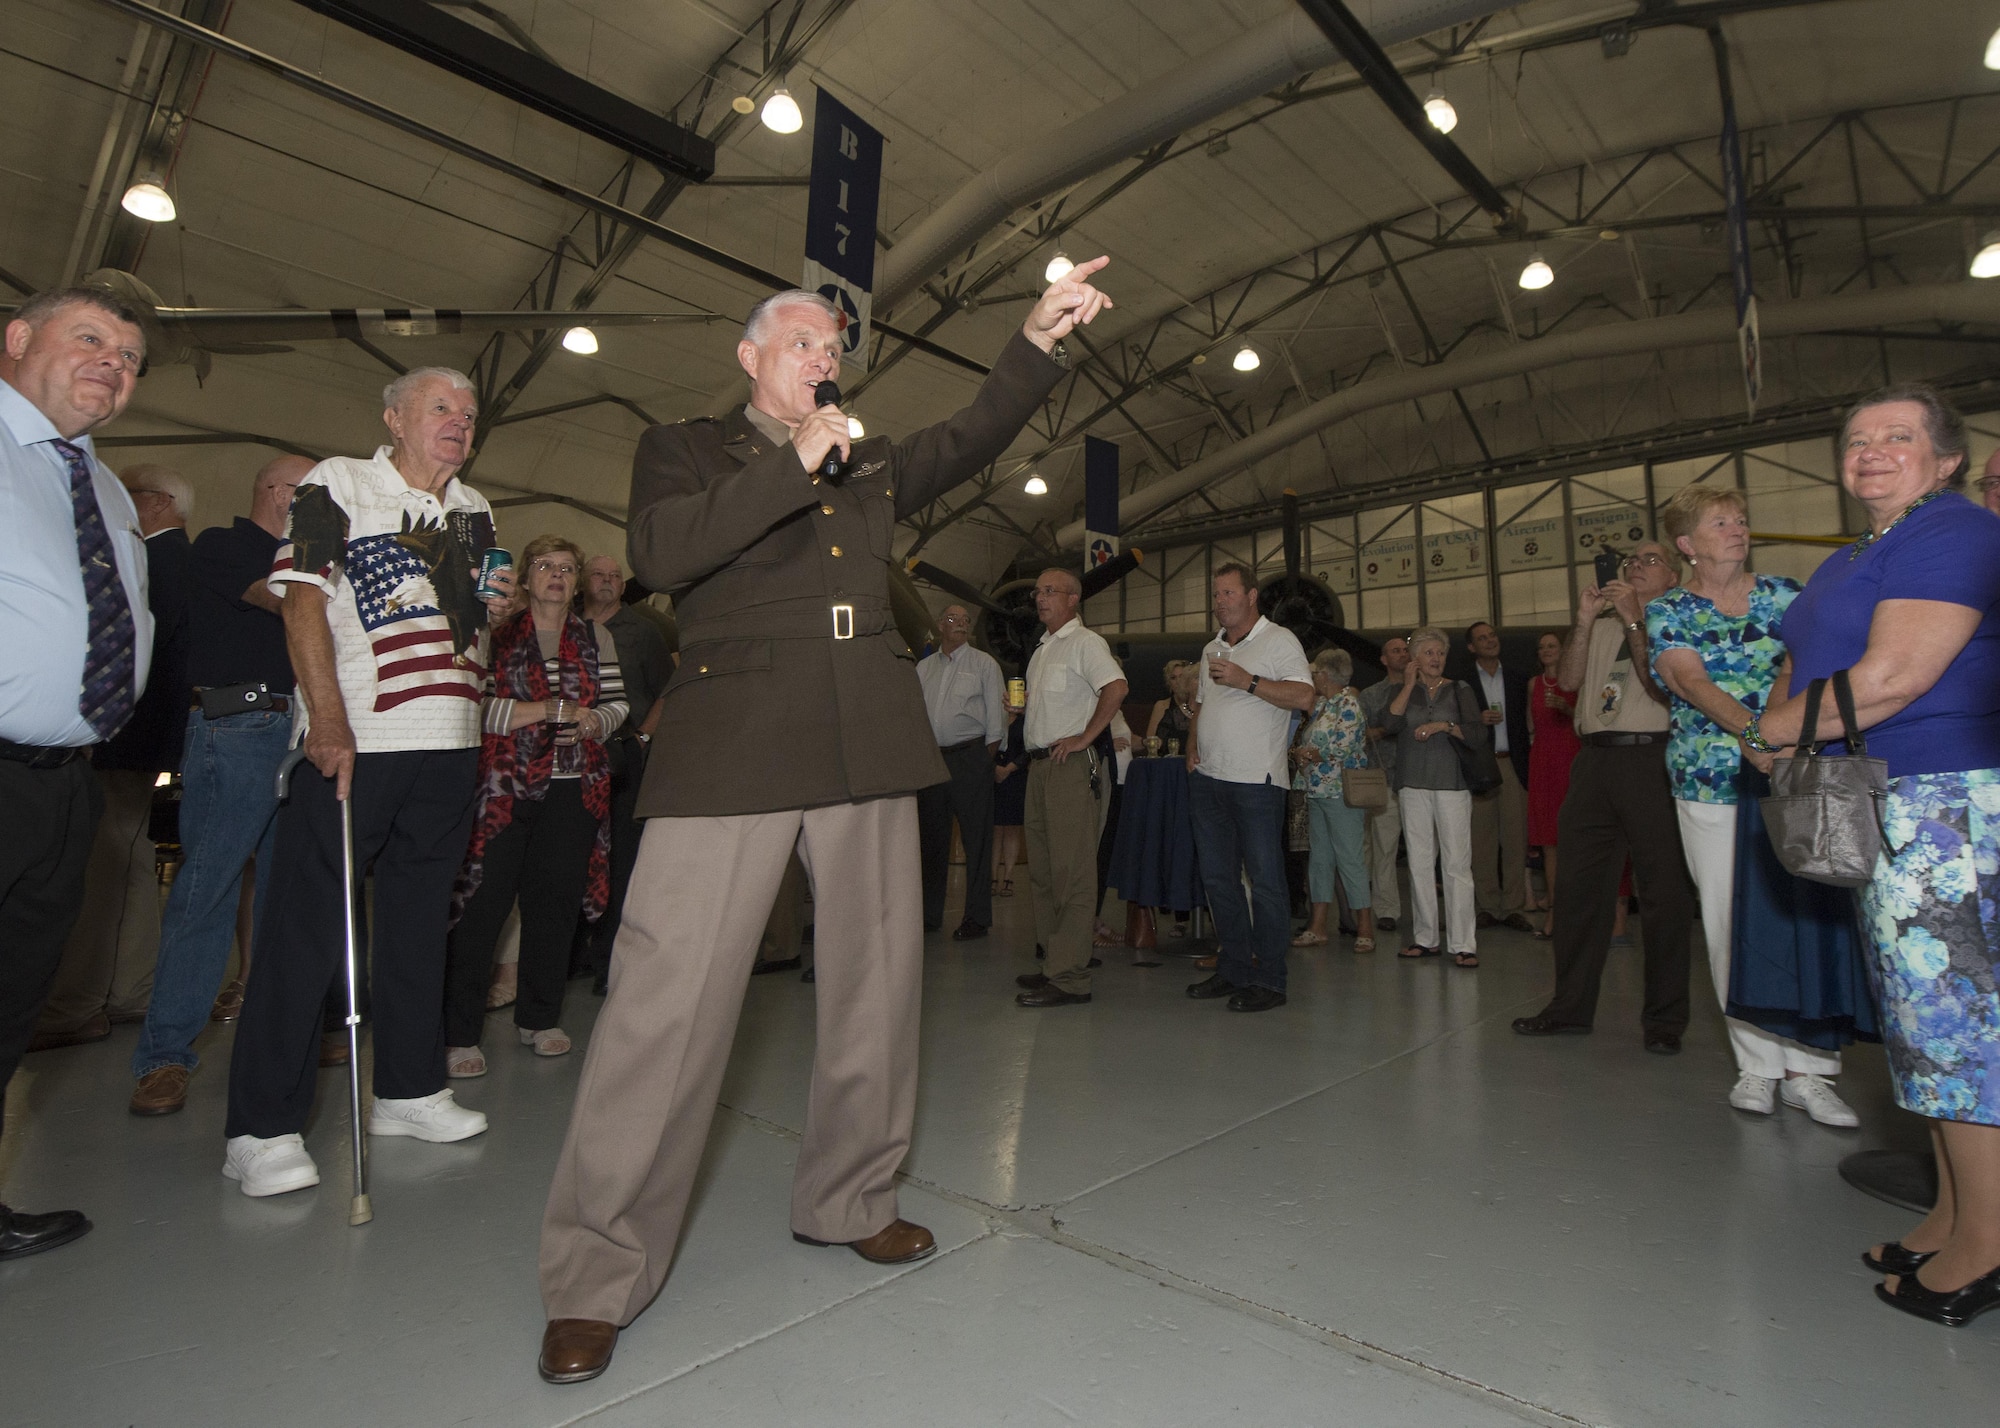 Retired Lt. Gen. William Welser III, former 436th Airlift Wing commander and current friend of the museum, dressed in a World War II-era U.S. Army Air Forces uniform speaks at the Festival of Flight Exclusive Party and Raffle Sept. 23, 2016, at the Air Mobility Command Museum on Dover Air Force Base, Del. Welser, who was wing commander from 1992 to 1994, was instrumental in reutilizing Hangar 1301 as the AMC Museum’s home. (U.S. Air Force photo by Senior Airman Zachary Cacicia)